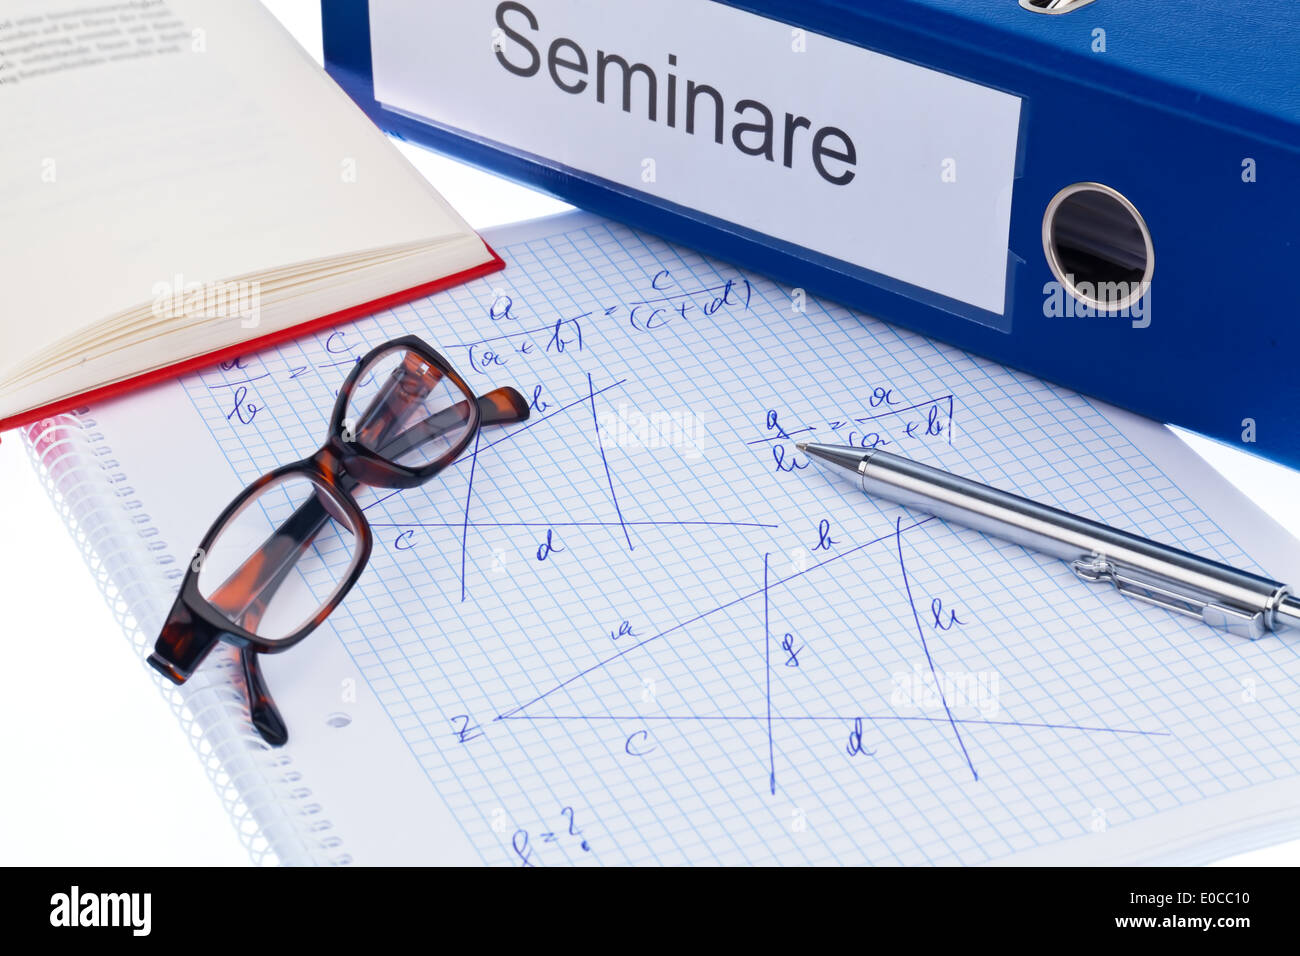 A symbolic photo for continuing education, advanced training and adult education. Briefcase and documents in a seminar, Ein Symb Stock Photo